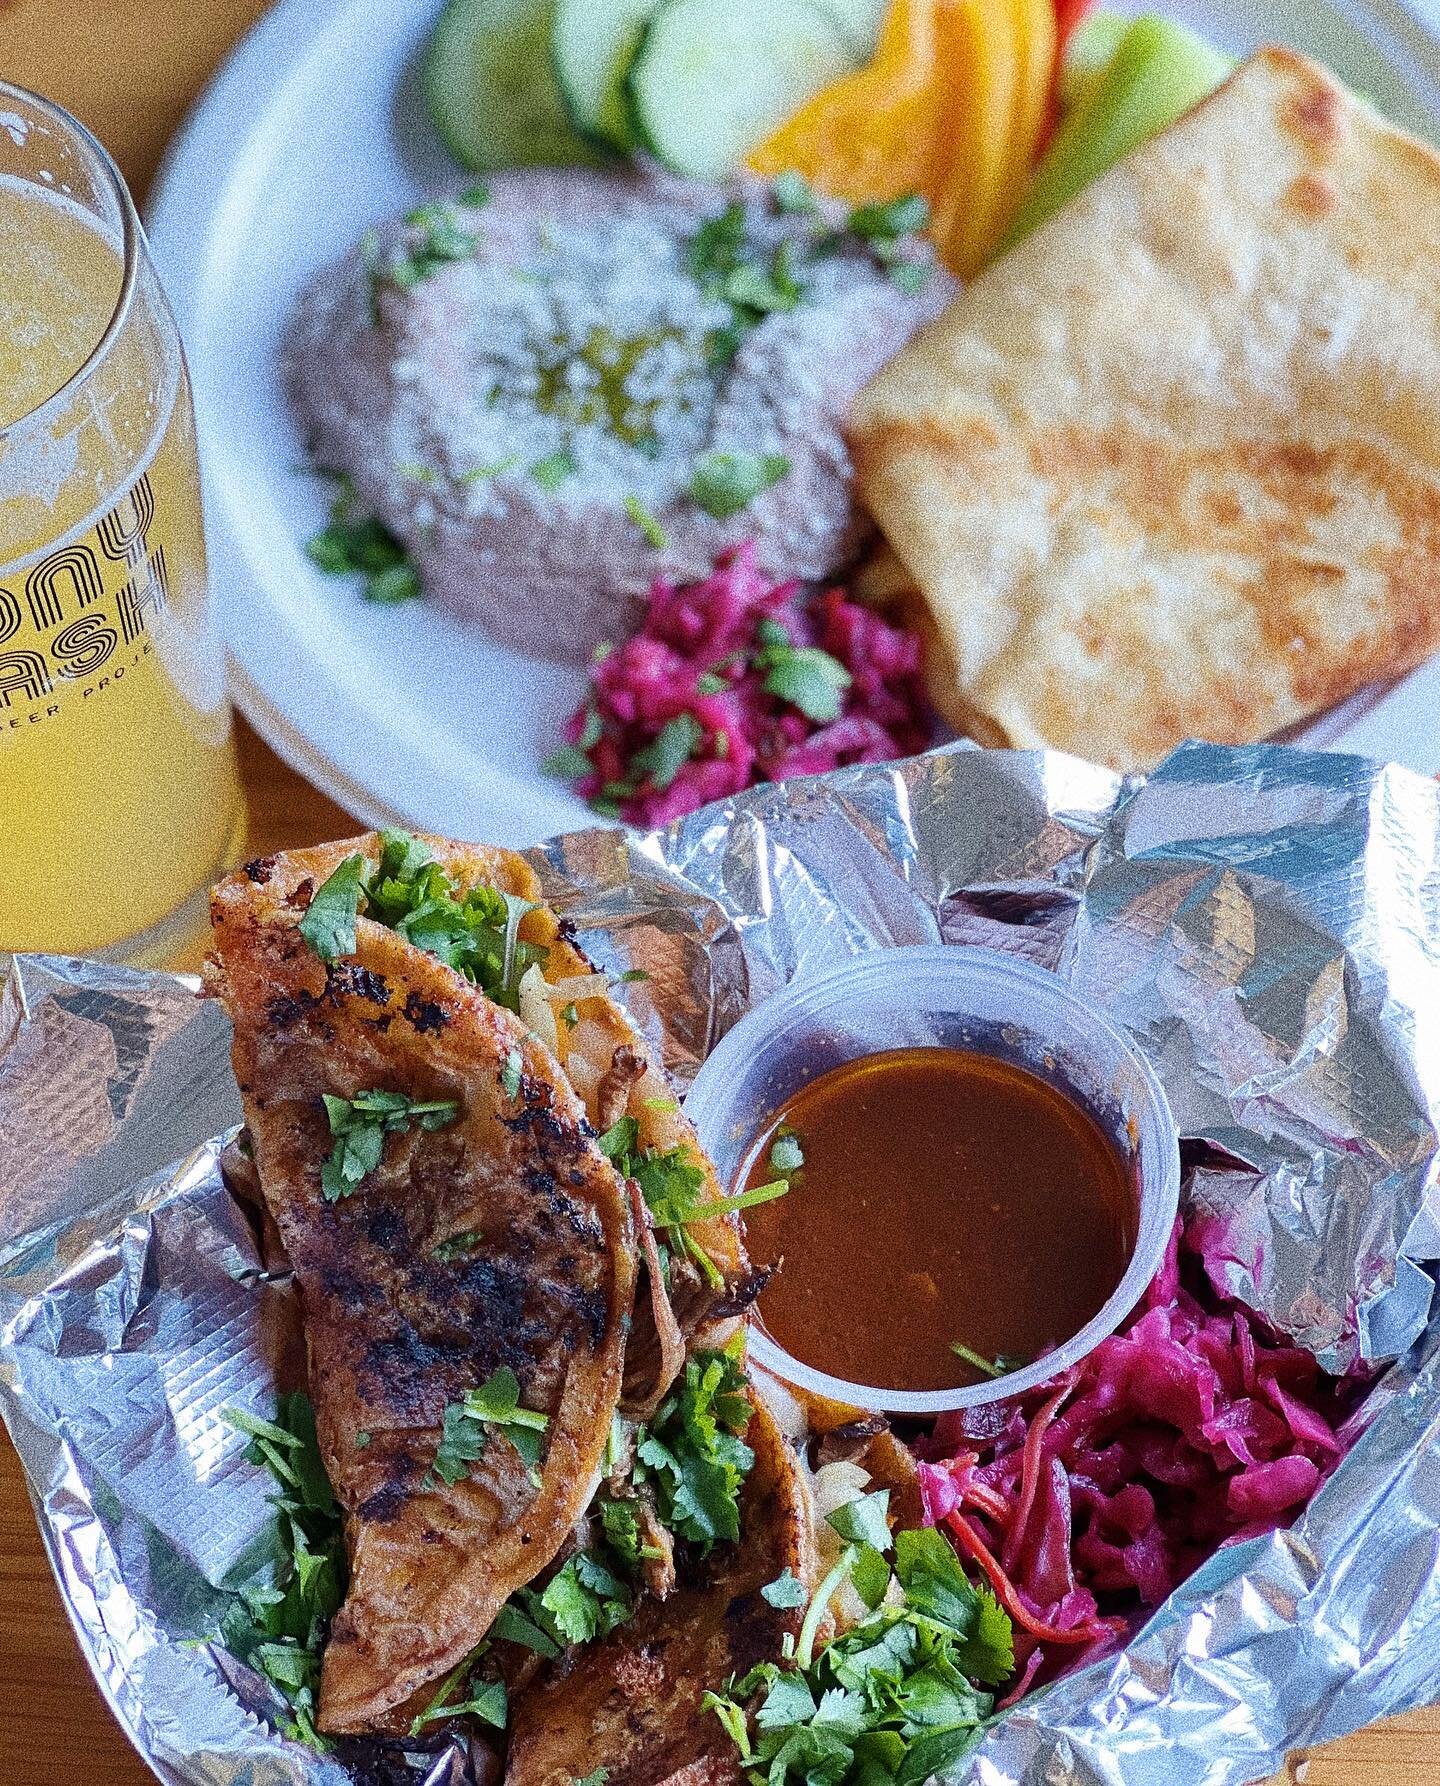 ☀️Treat yaself on this perfect Thursday 🔥

Taproom happy hour from 3-5PM 
$2 off drafts and 1/2 off flights 😎

All the food from @cdcuisine 🌮 

#todayat #zonymashbeerproject #zonymash #nolaeats #noladrinks #nolabreweries #brewery #happyhournola #☀